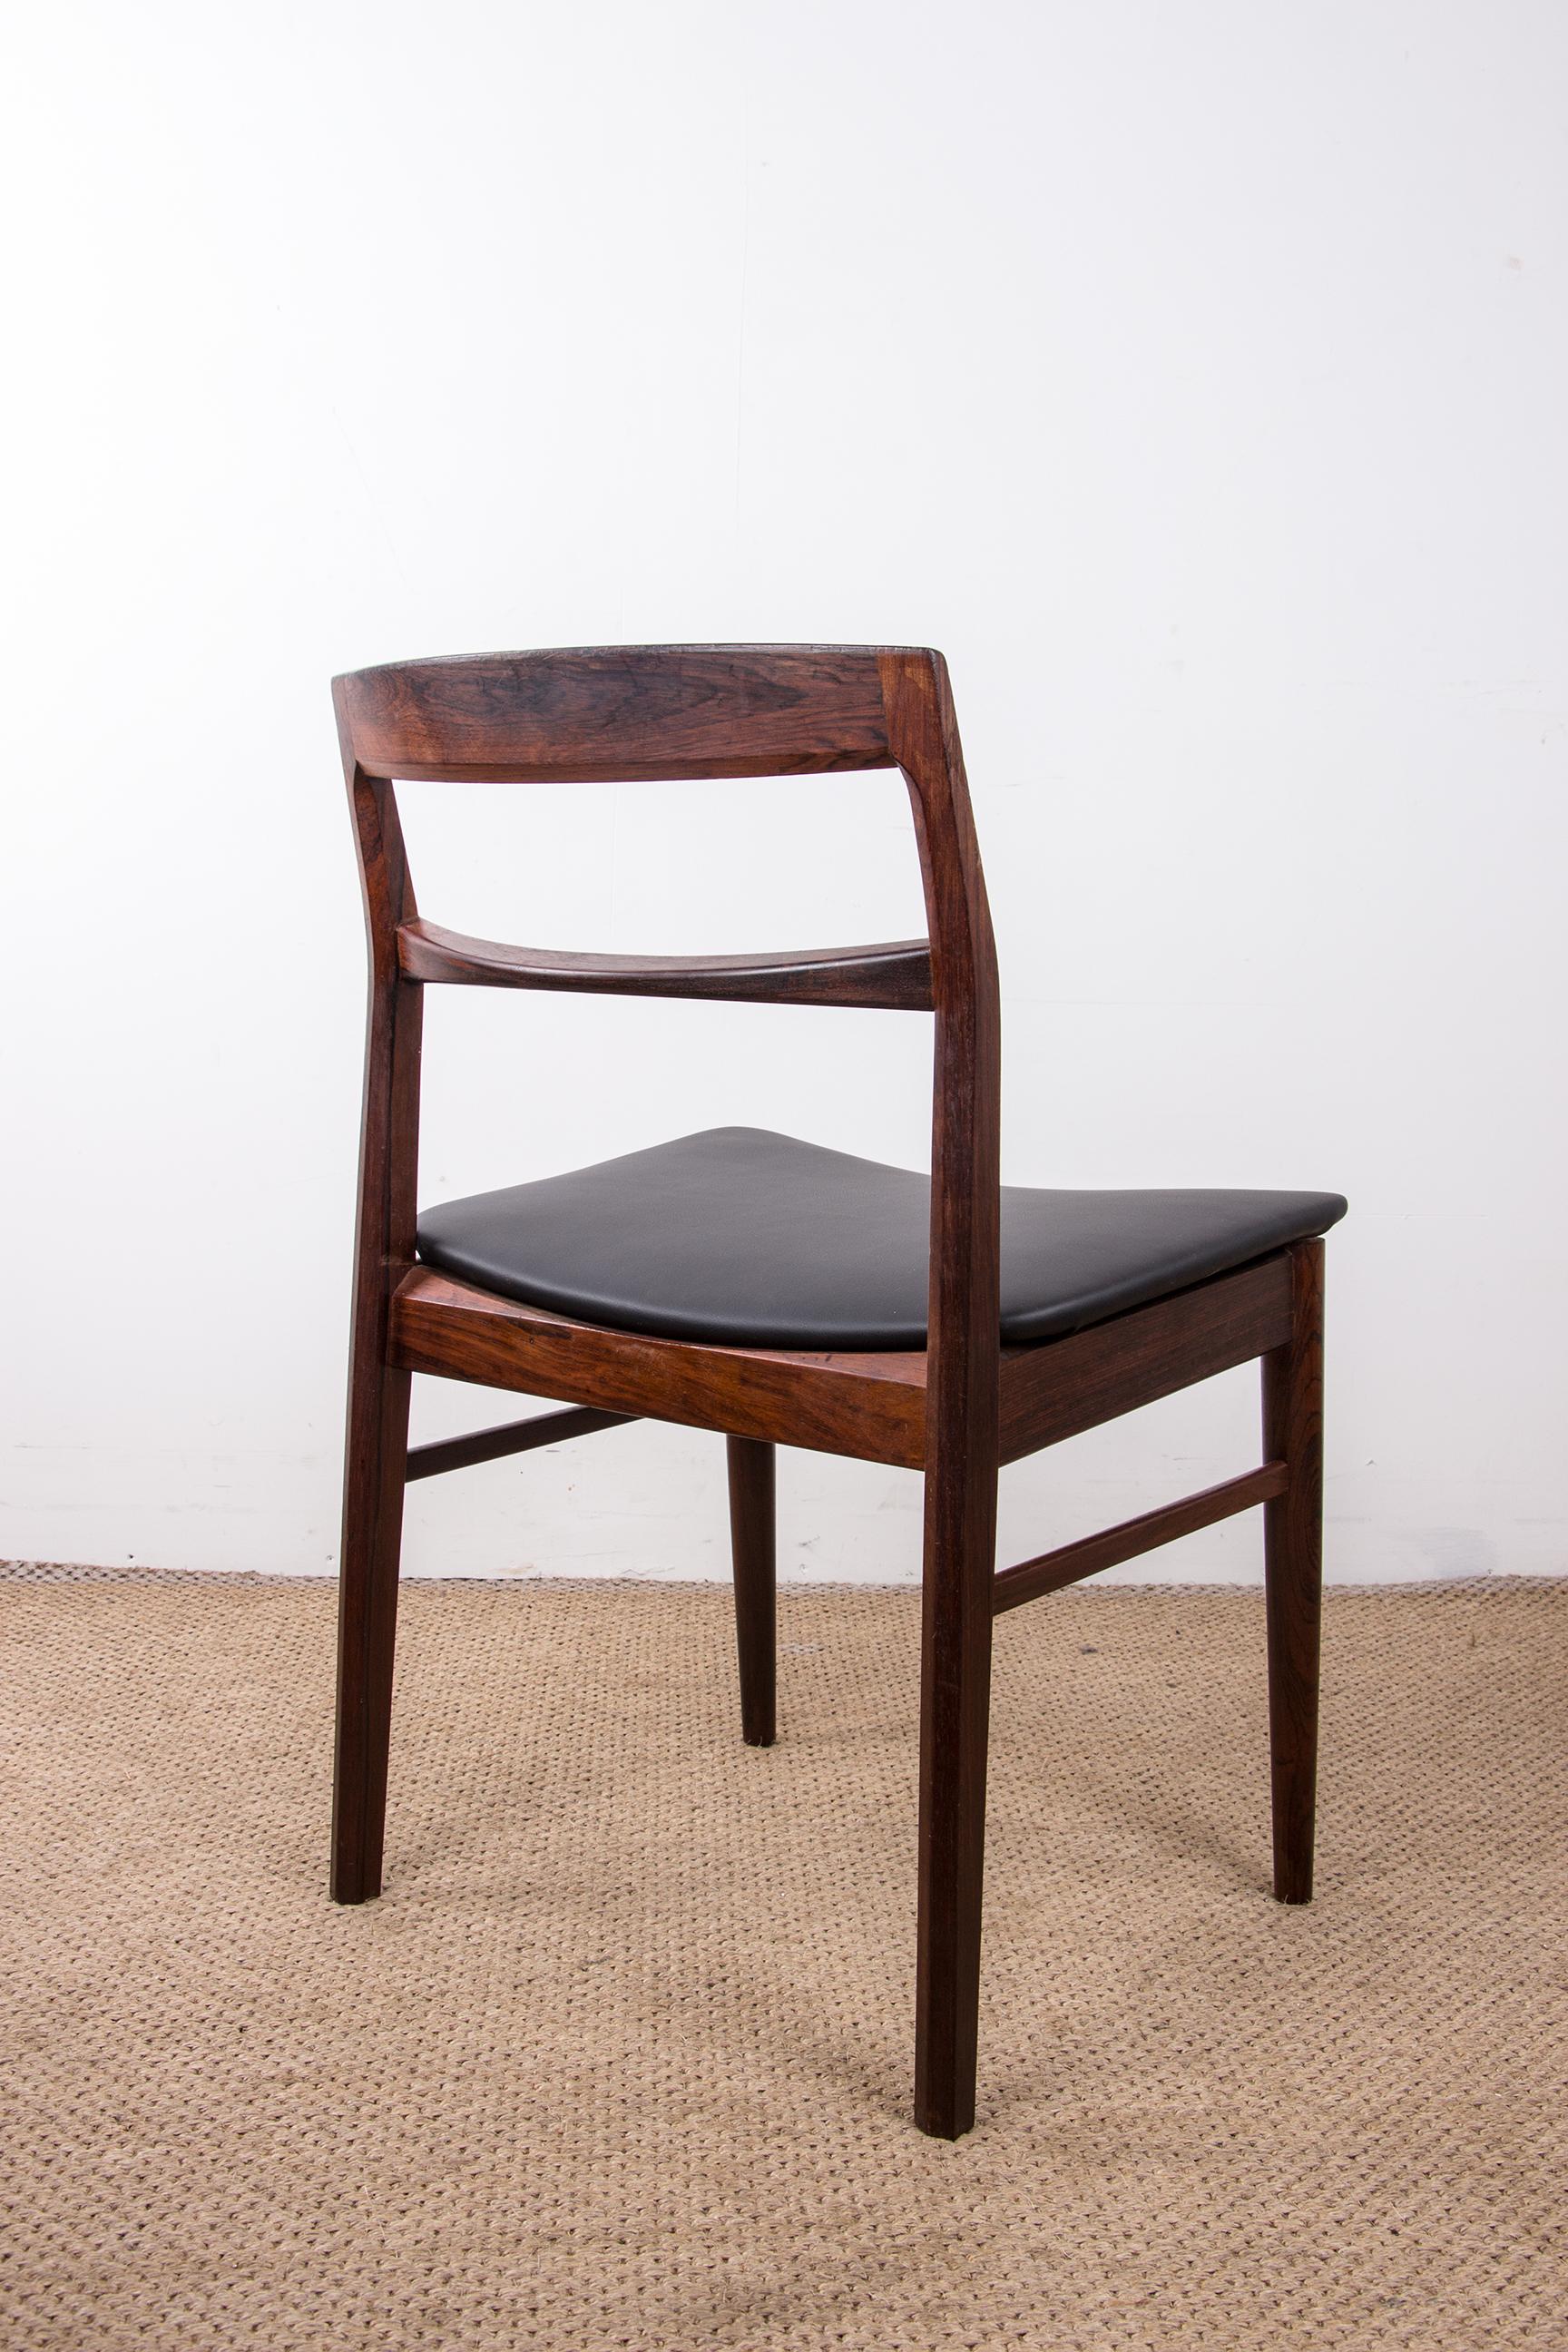 Set of 4 Danish chairs in Rosewood and Skai new by Henning Kjaernulf for Vejl For Sale 7